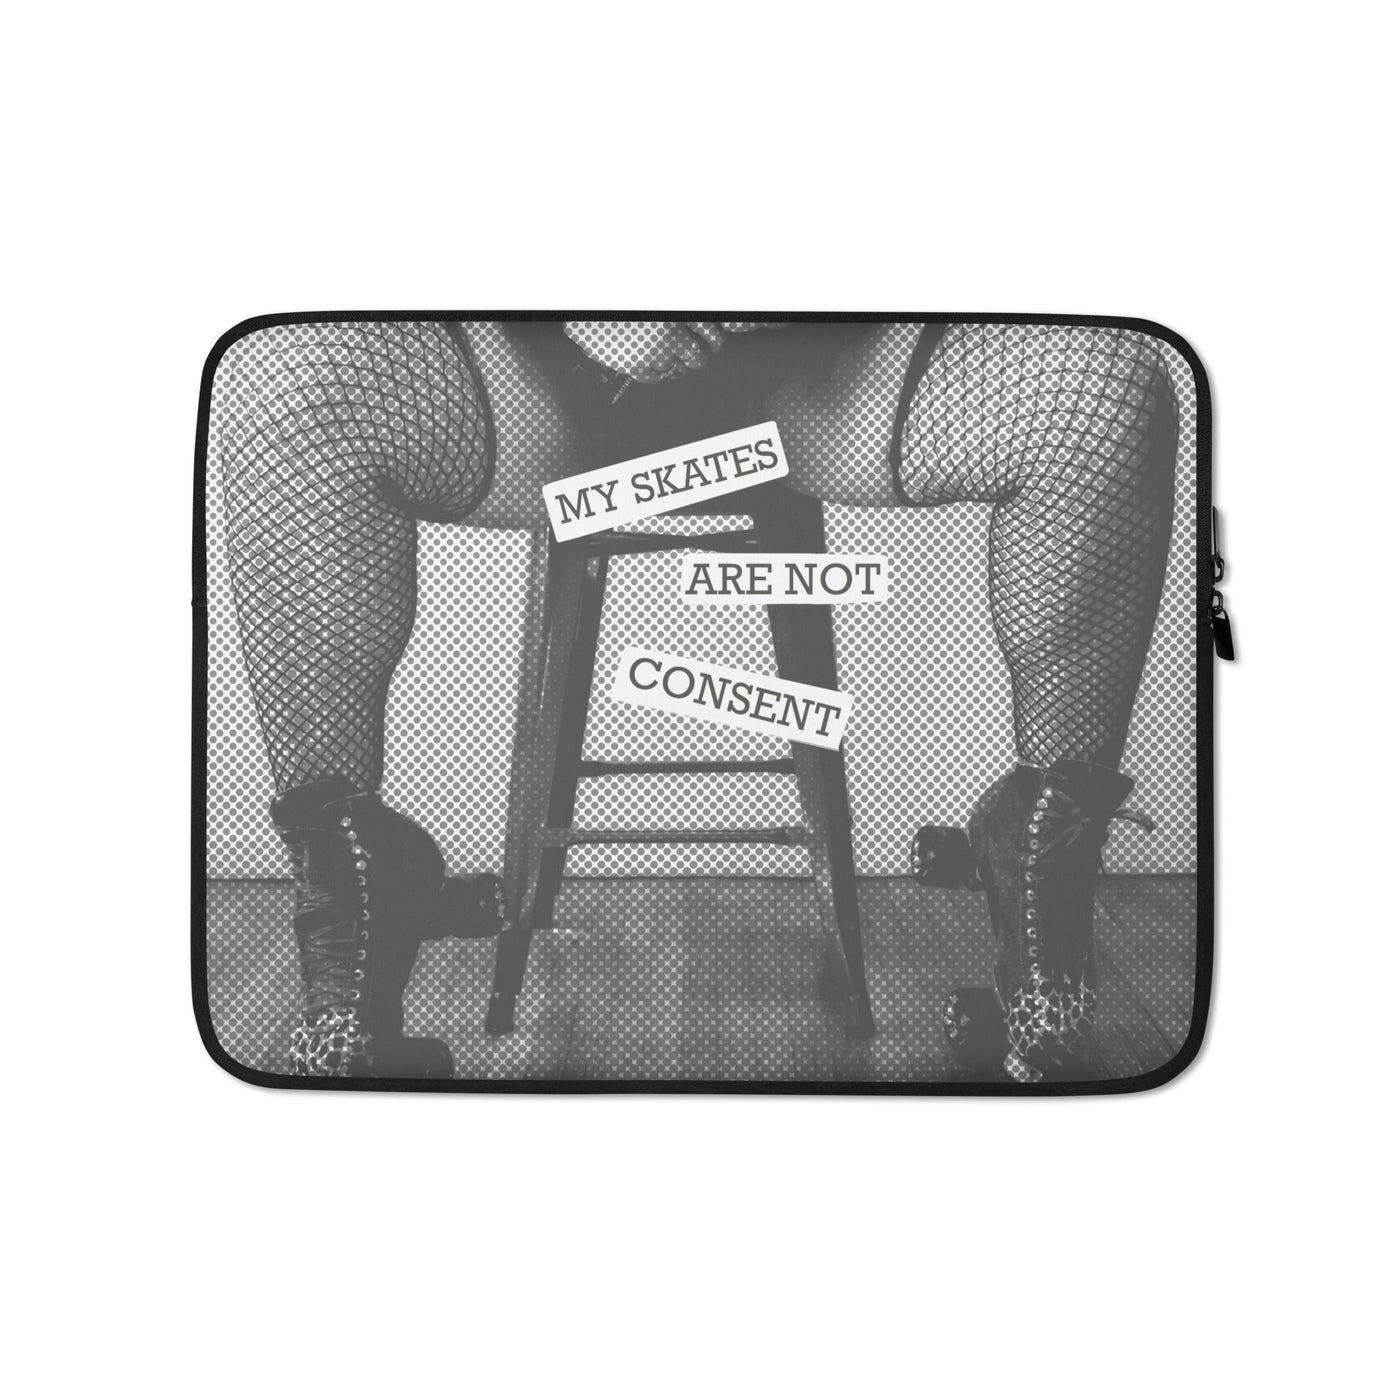 My Skates Are Consent Laptop Sleeve